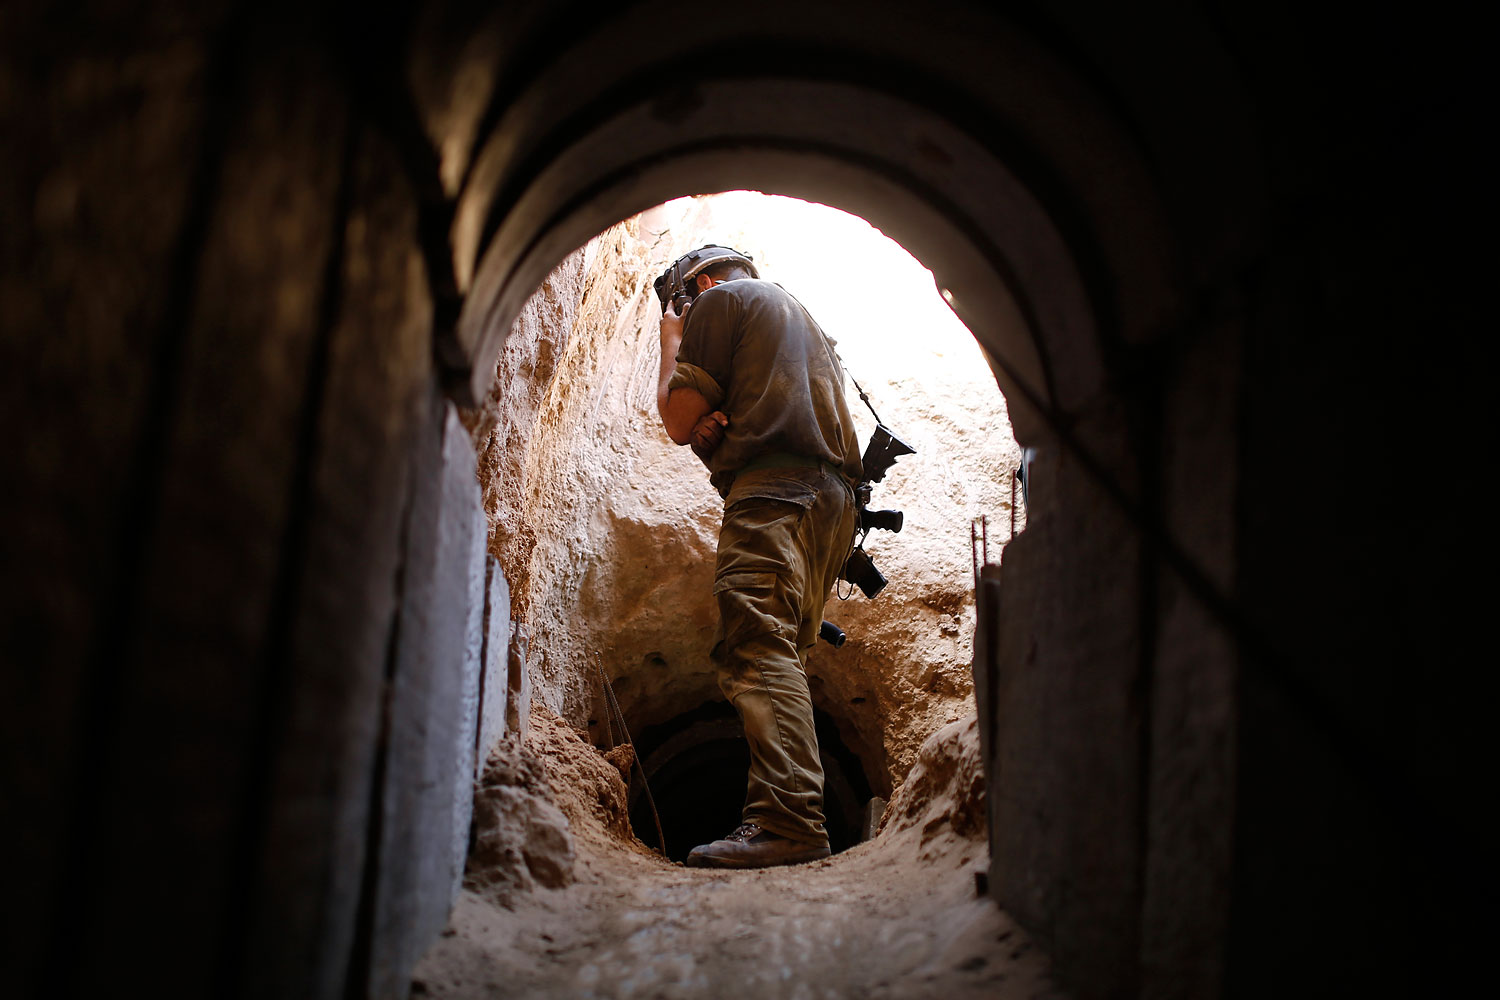 Israeli technology exposes Gaza attack tunnel, challenges Hamas